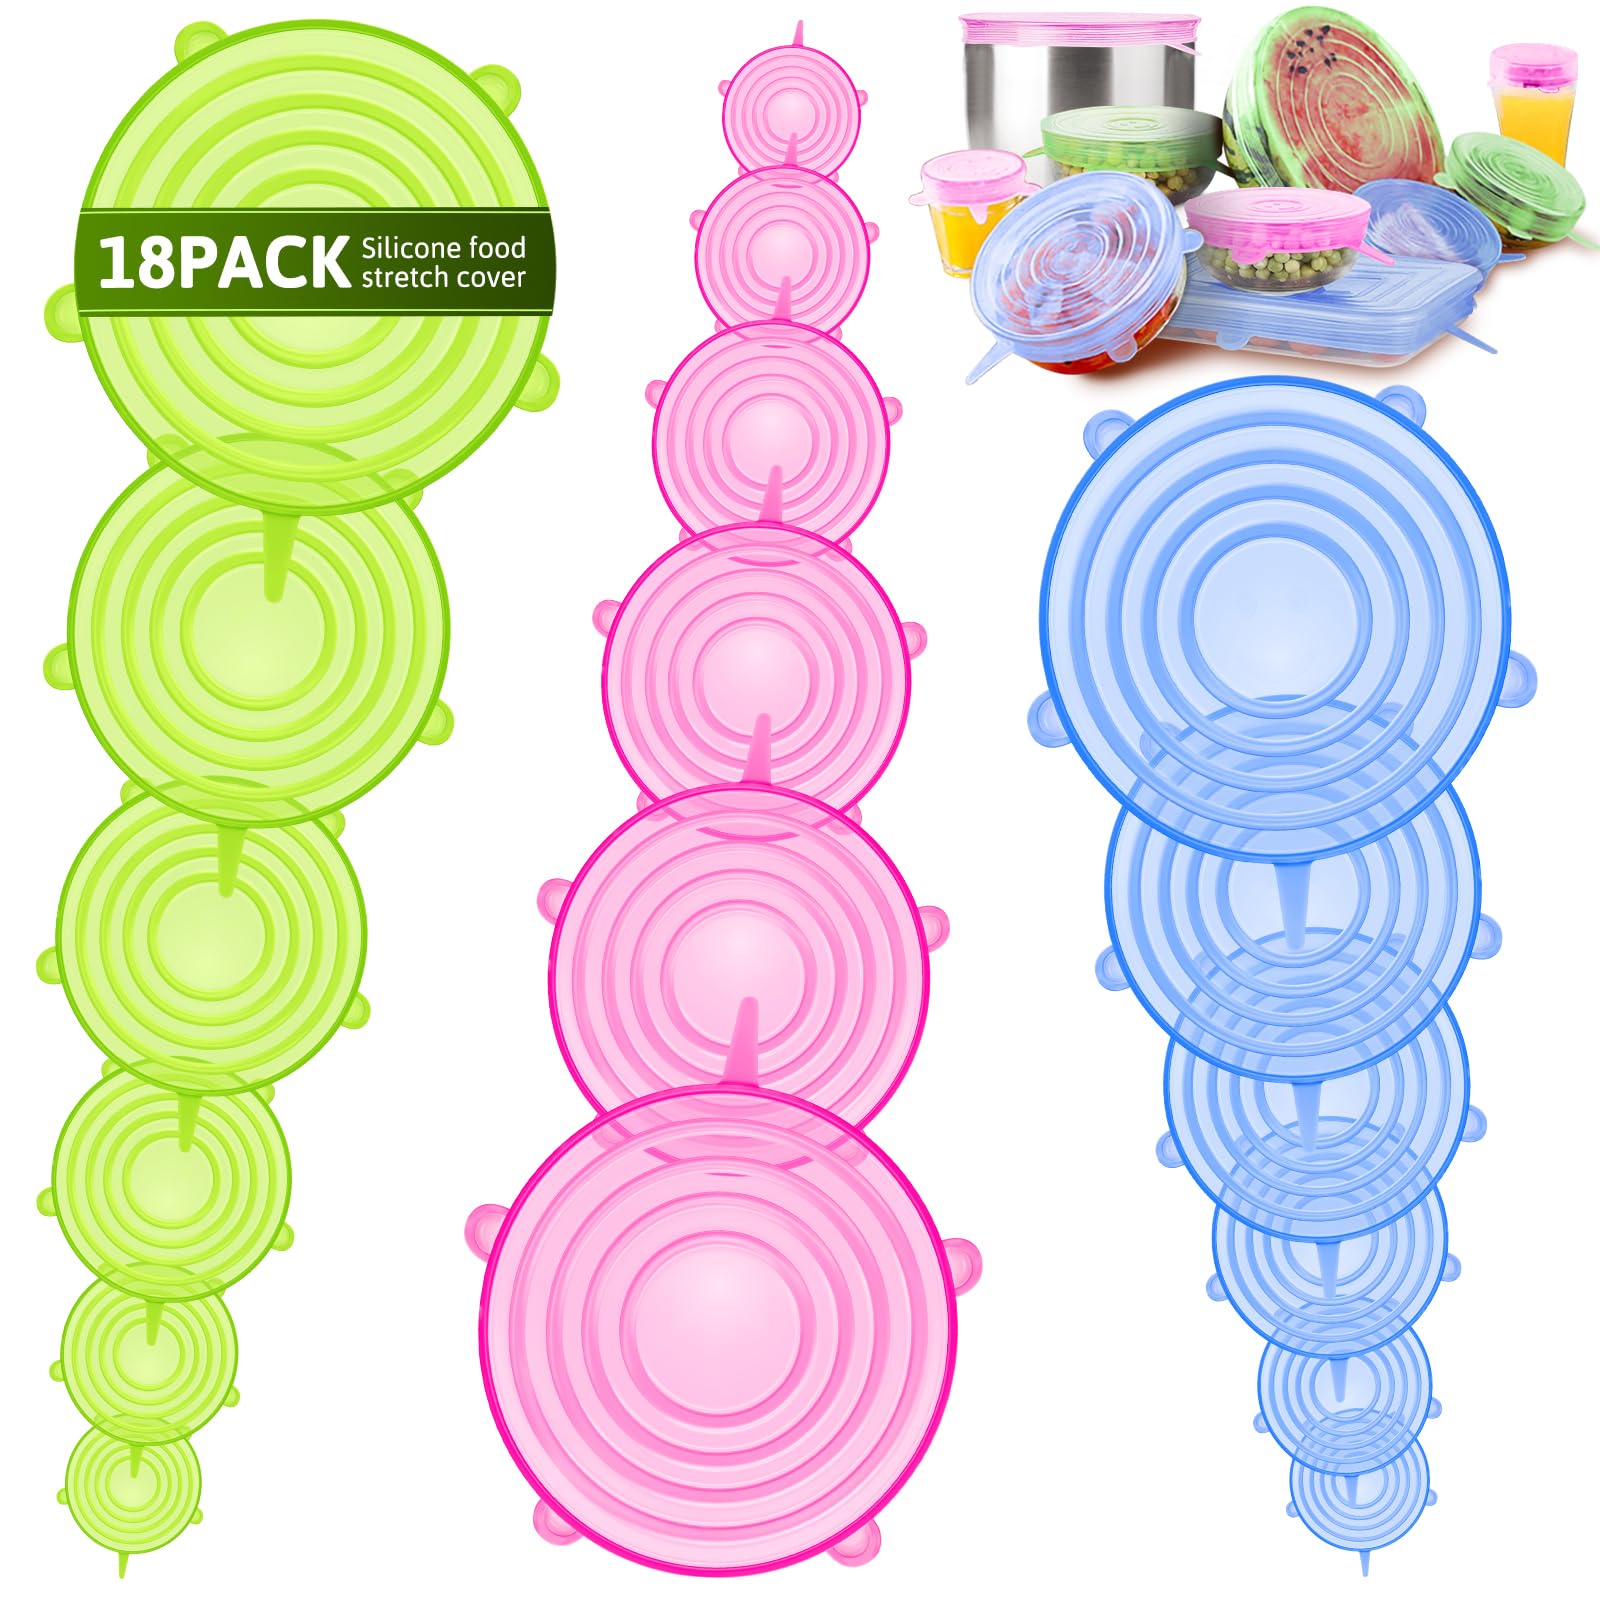 BFONS 18 Pack Silicone Stretch Lids, 6 Different Sizes Silicone Lids 100% Safe Food Grade Silicone to Meet Most Container, Microwave Cover for Food Storage, Silicone Can Cover, Silicone Bowl Covers